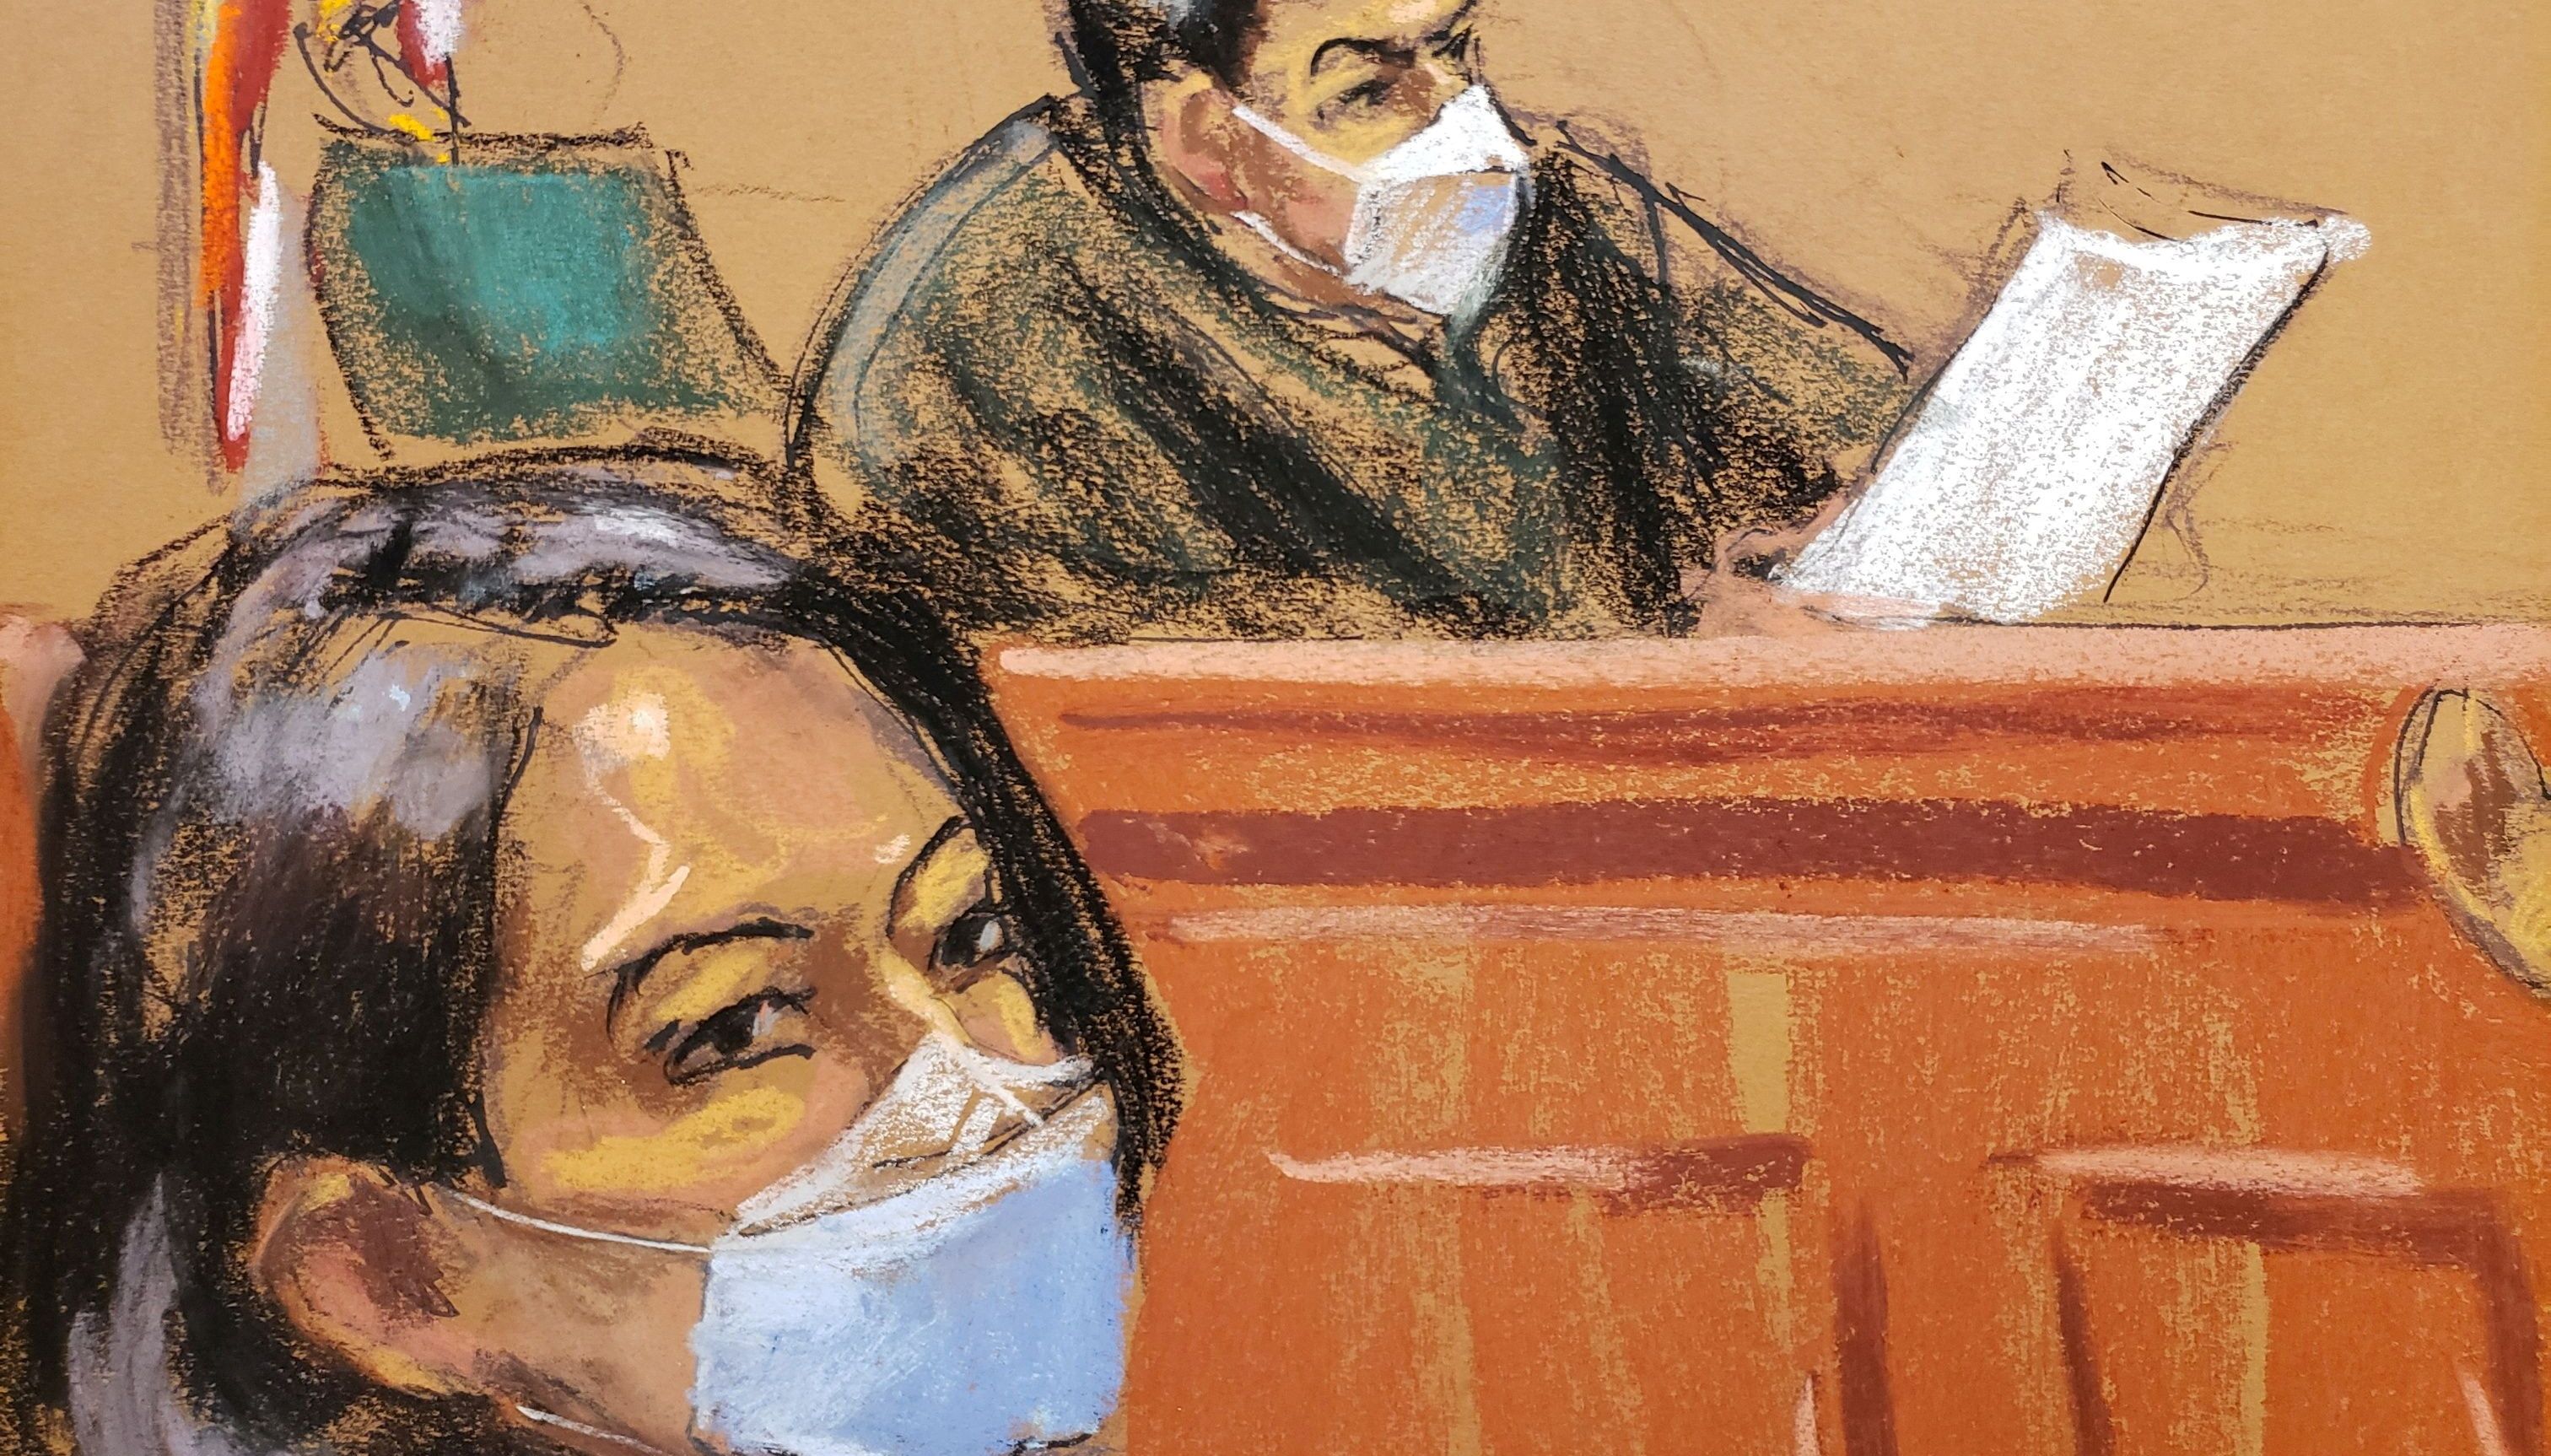 Judge Alison Nathan questions a juror as Jeffrey Epstein associate Ghislaine Maxwell listens in a courtroom sketch in New York City, U.S., March 8, 2022..REUTERS/Jane Rosenberg